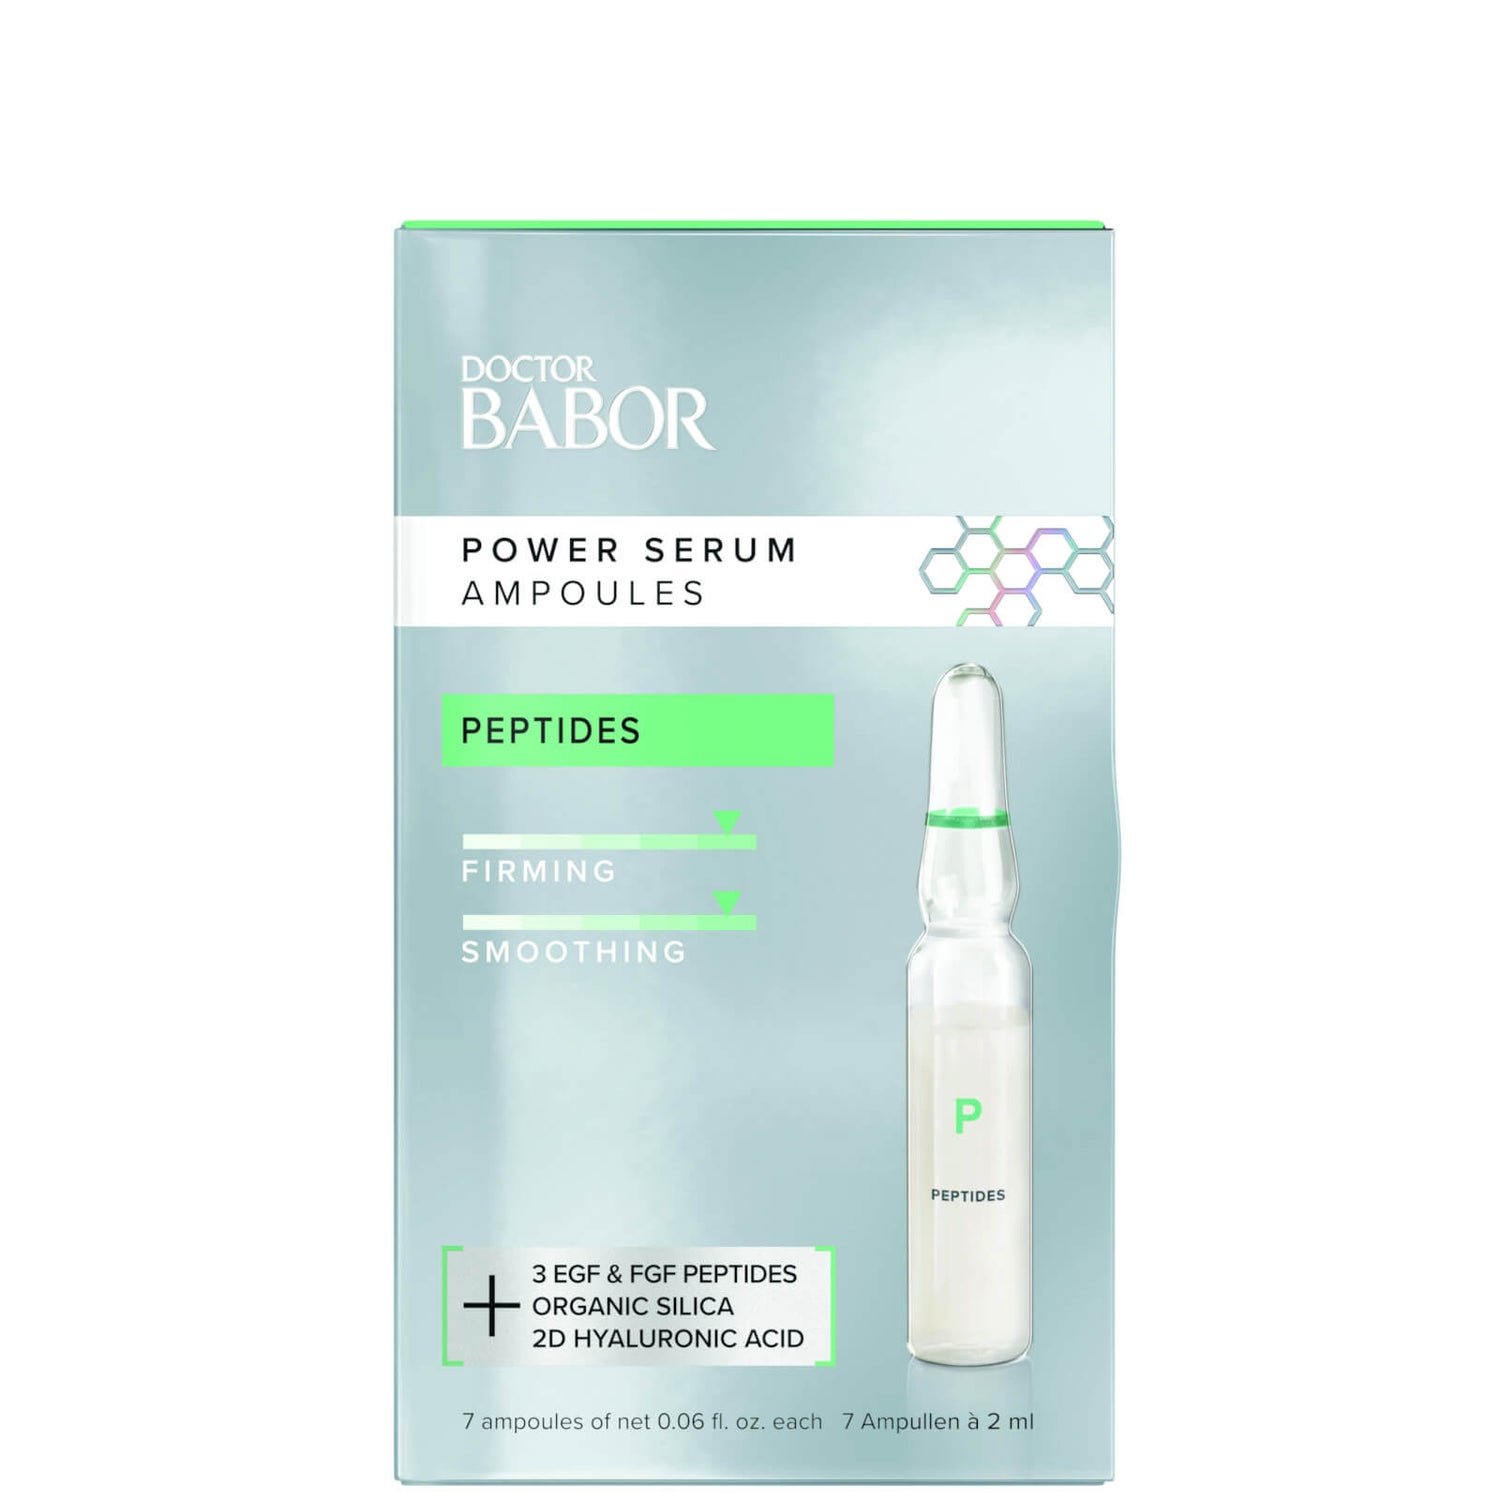 Doctor Babor Power Serum Ampoule Peptides